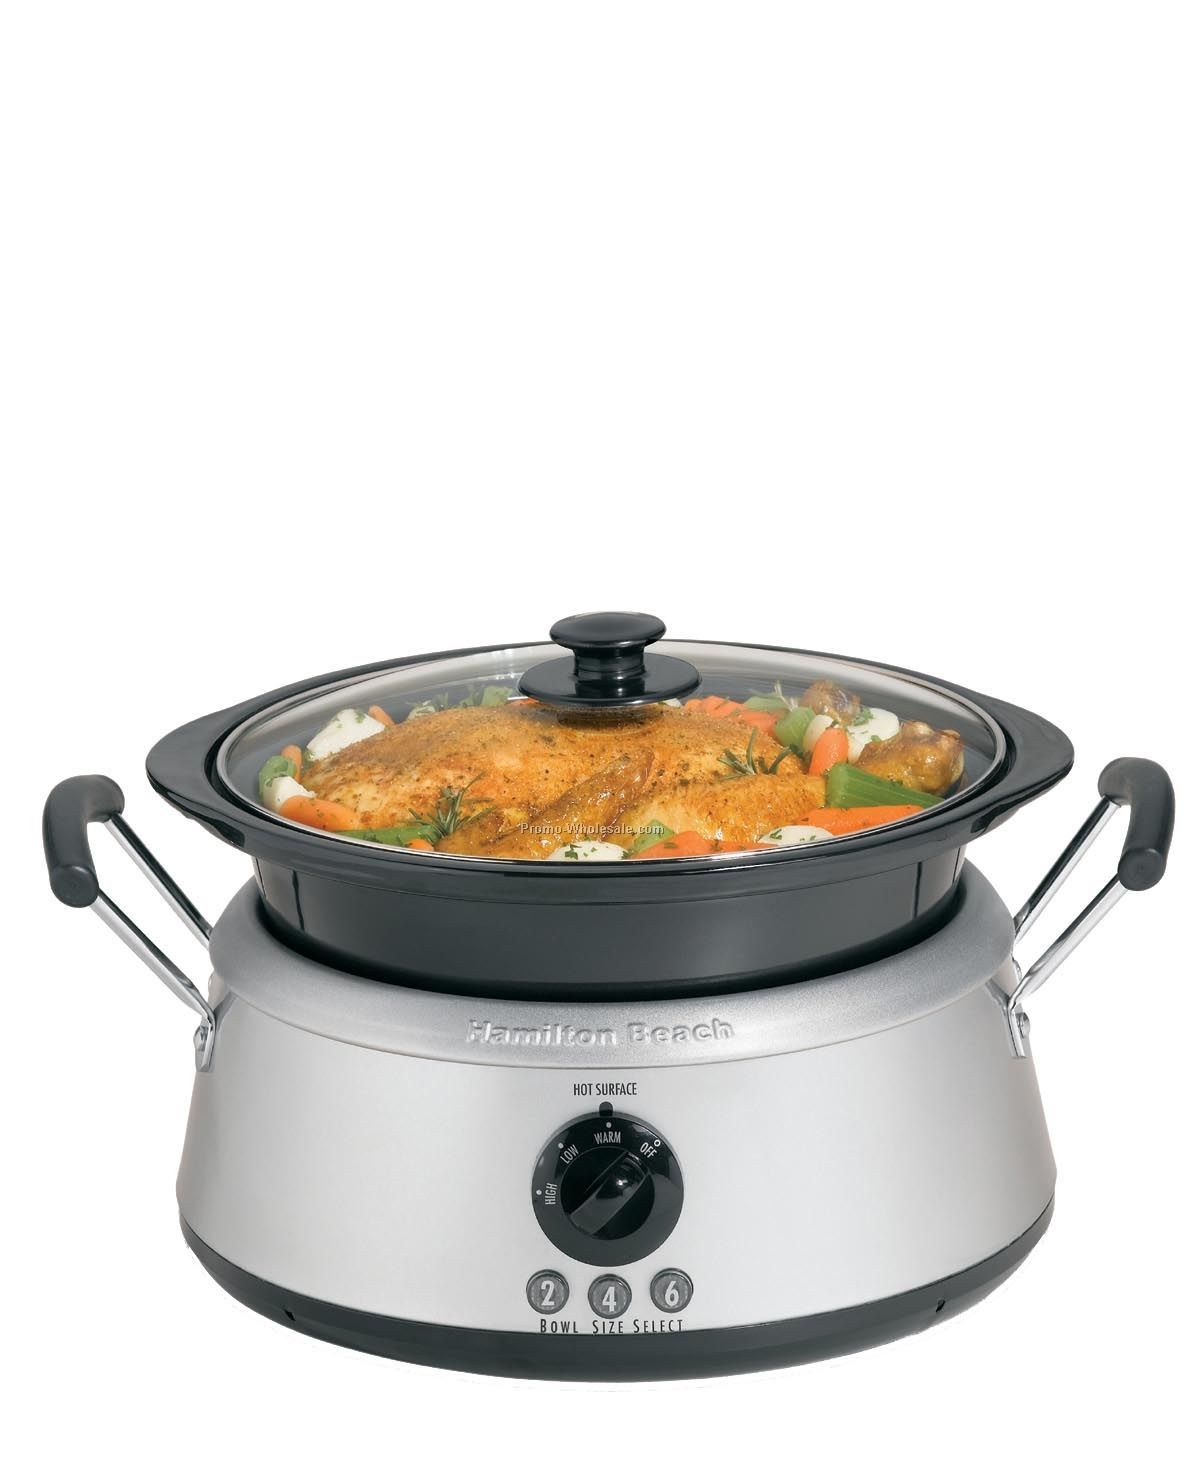 Hamilton Beach 3-in-one Slow Cooker